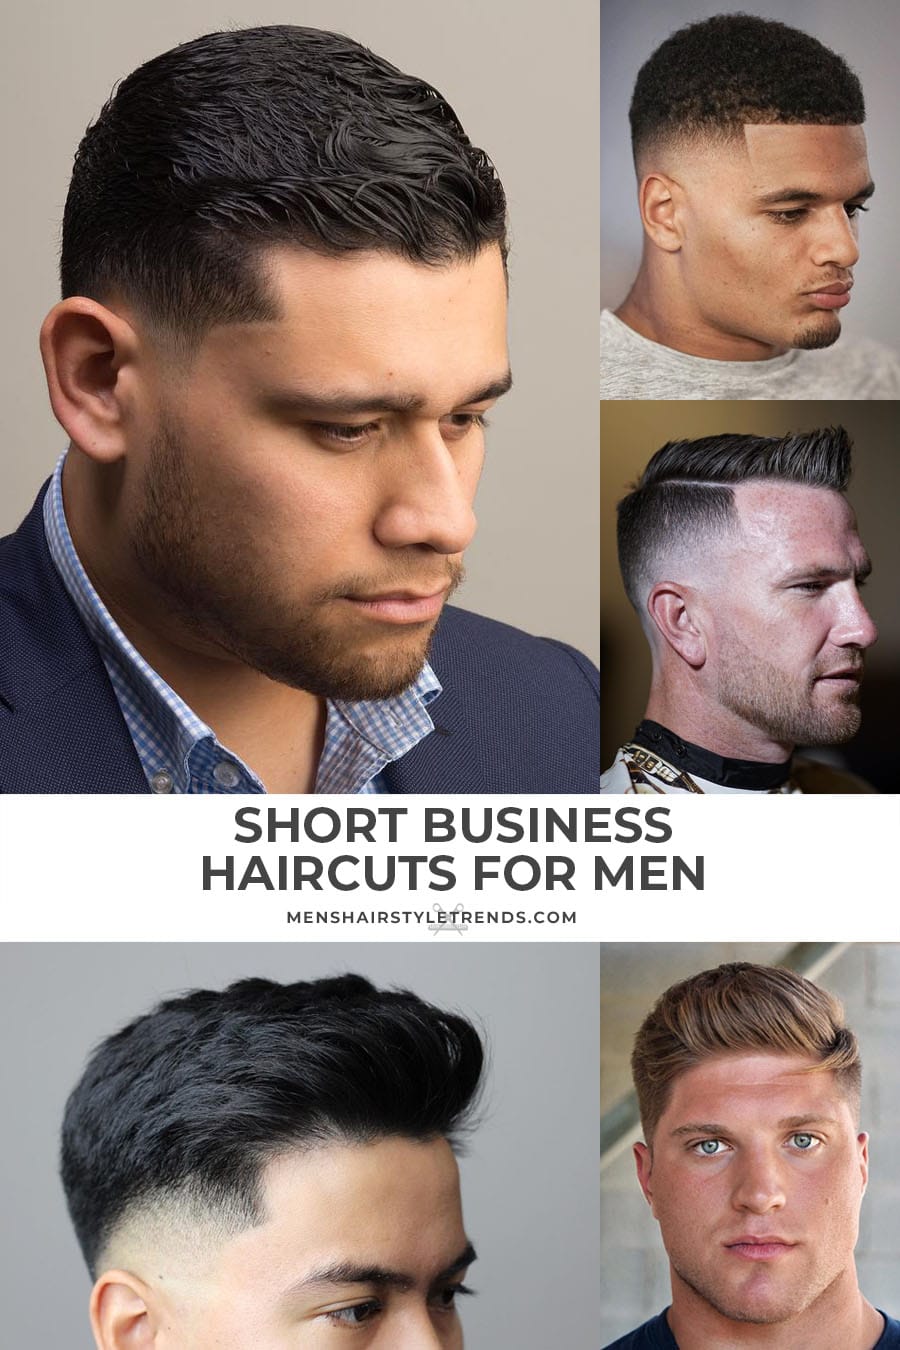 You don't need a business haircut for being a Business Man, we'll